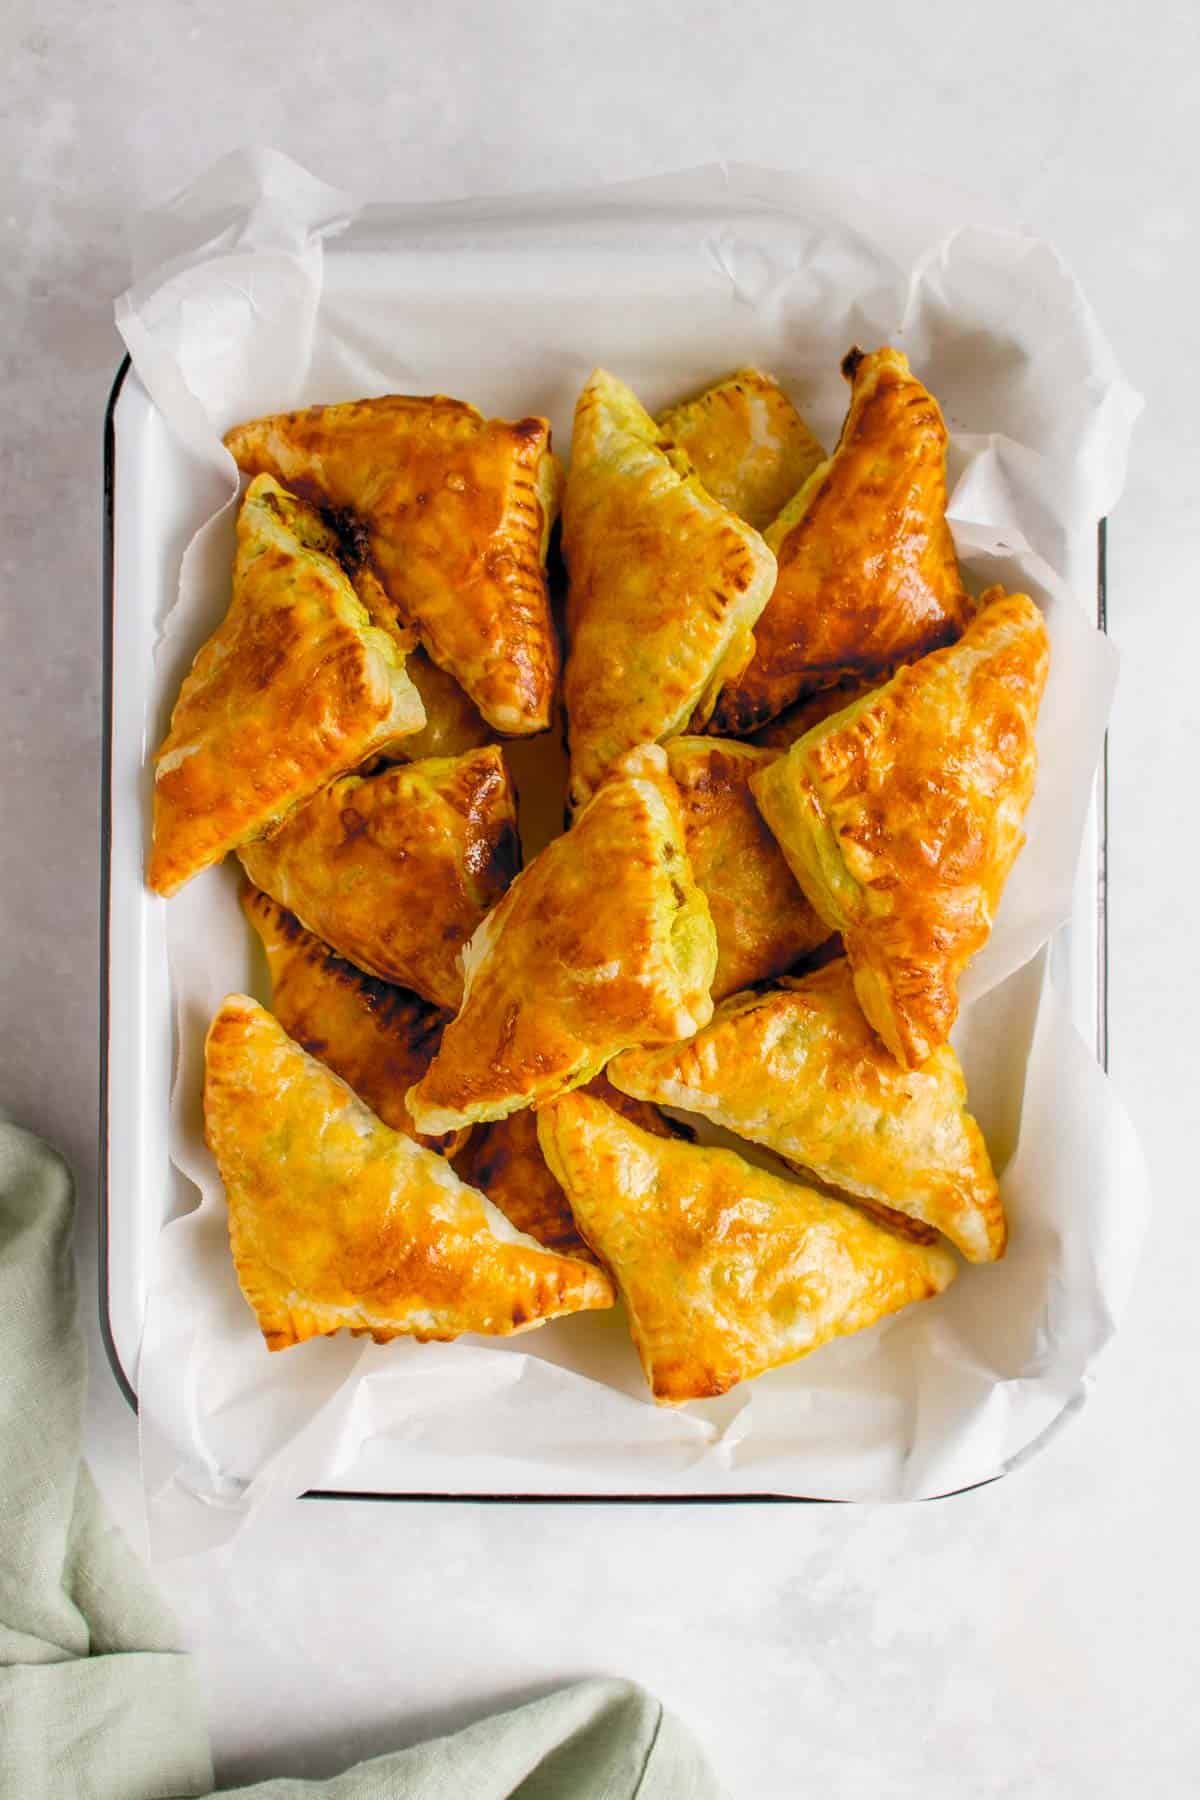 Beef curry puffs in a lined tray.